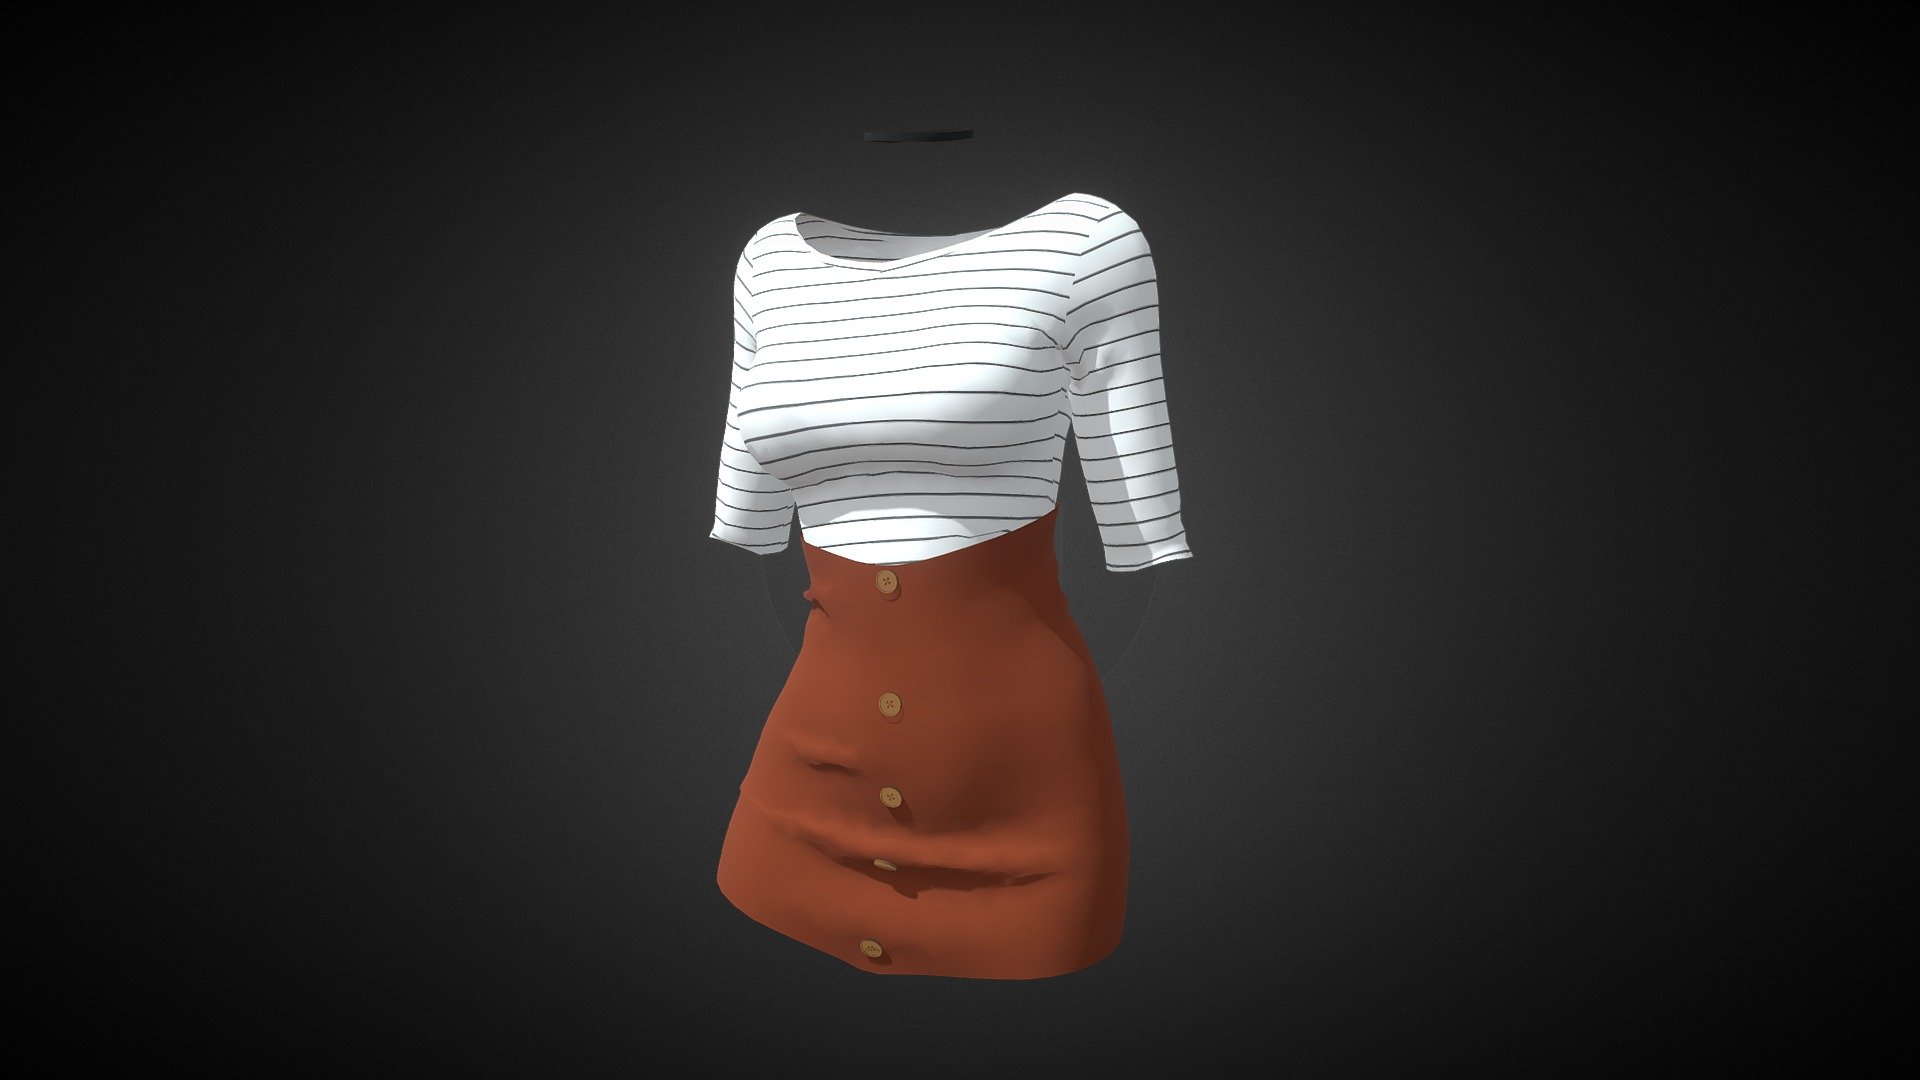 *❤ ❣ 3d Dress, based on  my  today´s outfit. It was made in Marvelous Designer, you can find the render in my Instagram &lt;3 ❤ ❣ * https://www.instagram.com/androkumuart/

As hobby I love doing clothes here so i hope you like it ♥
If you use it, tag me in instagram ( @androkumuart or @androkumura) to see your amazing work :D This is a fbx file 3d model